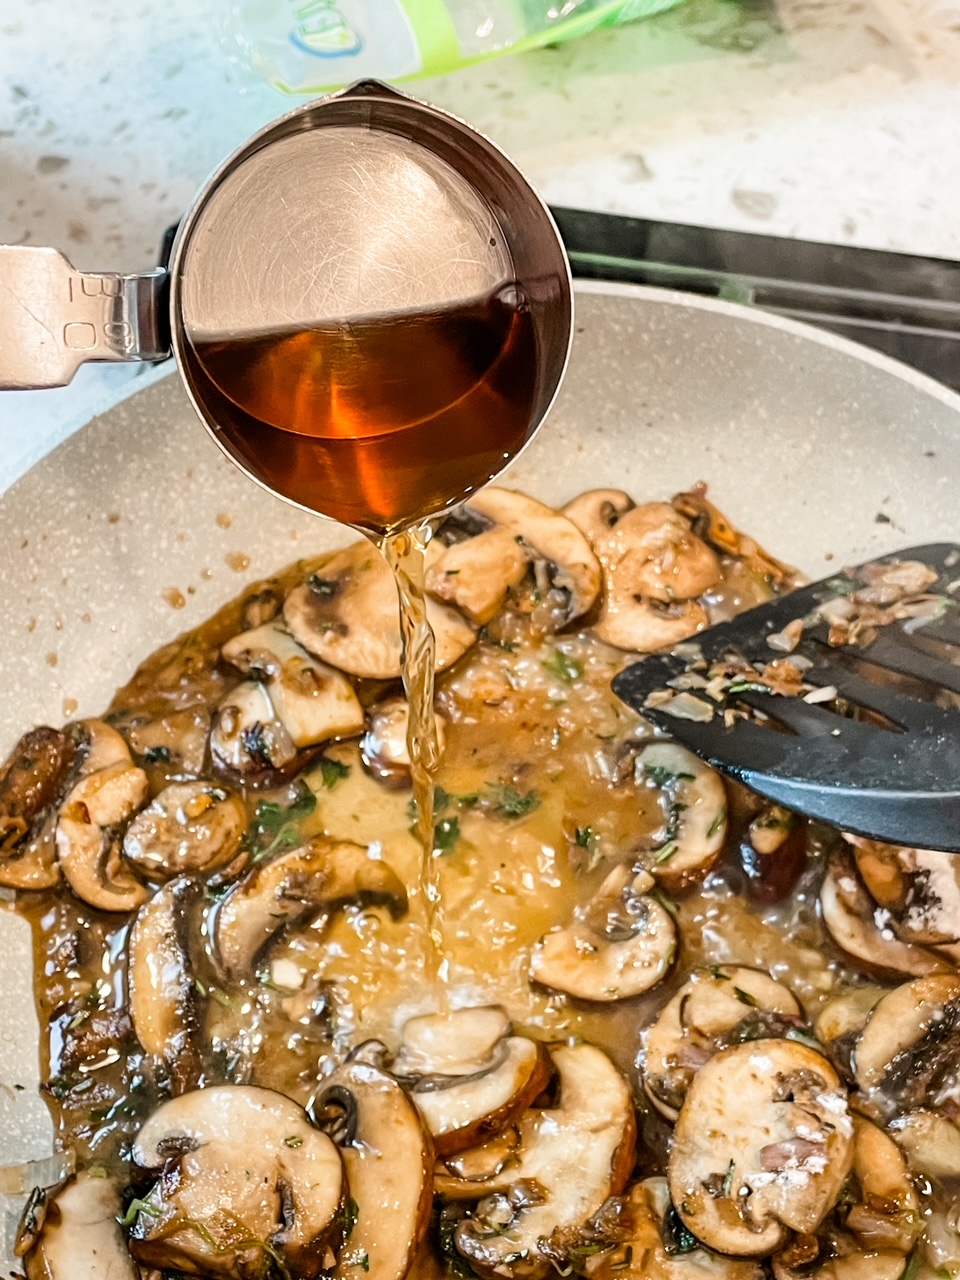 The marsala wine being poured into the sauce for the Healthier Chicken Marsala